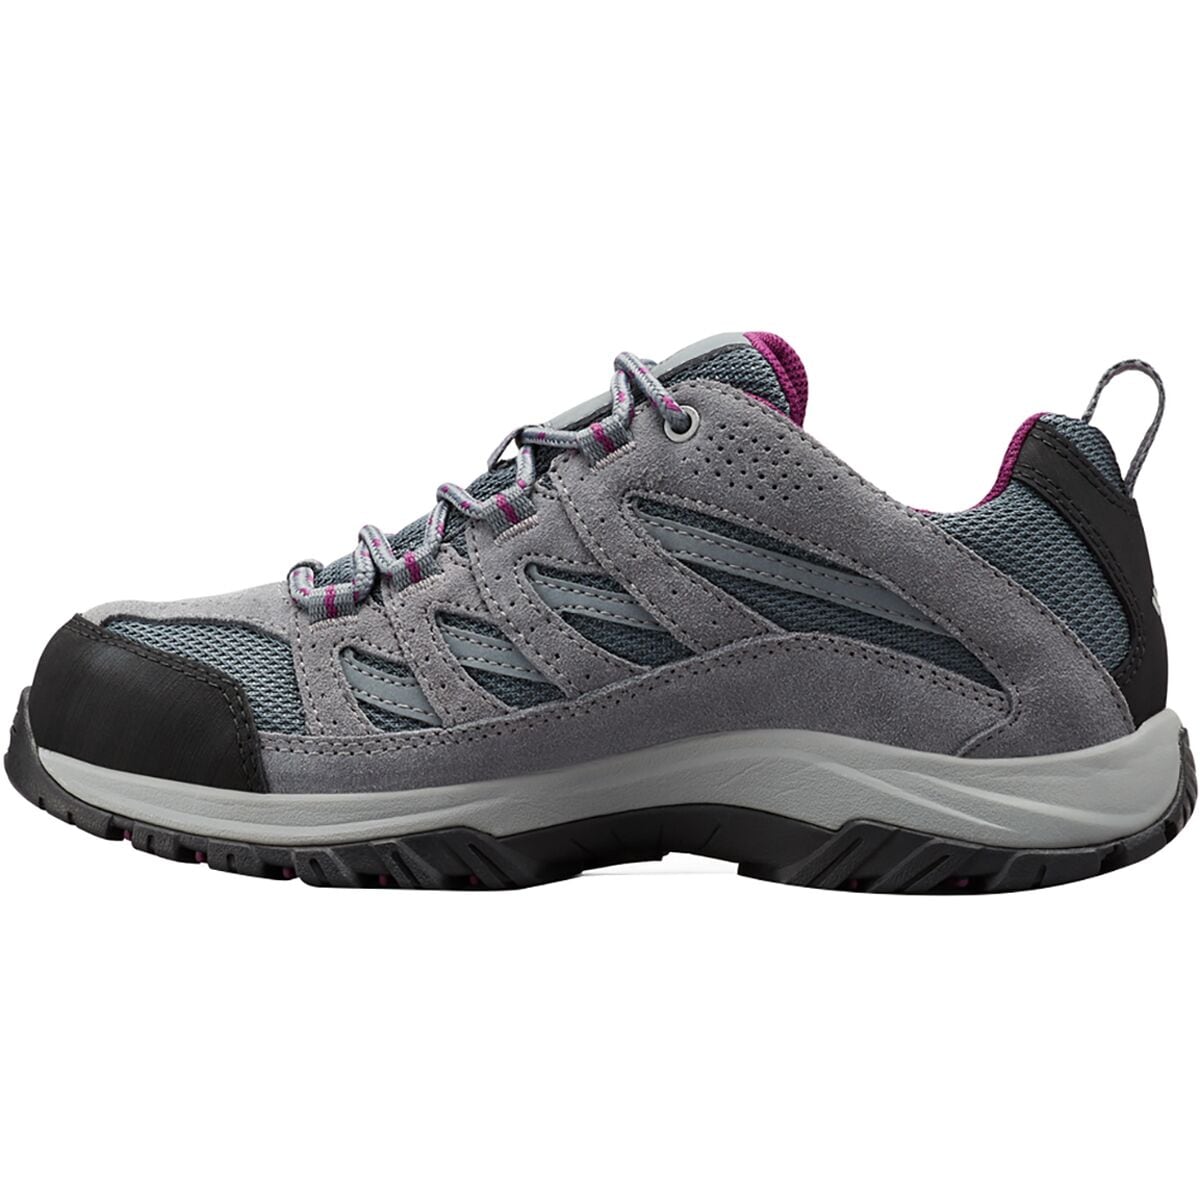 Zapatillas Columbia Mujer Crestwood Impermeable Trekking